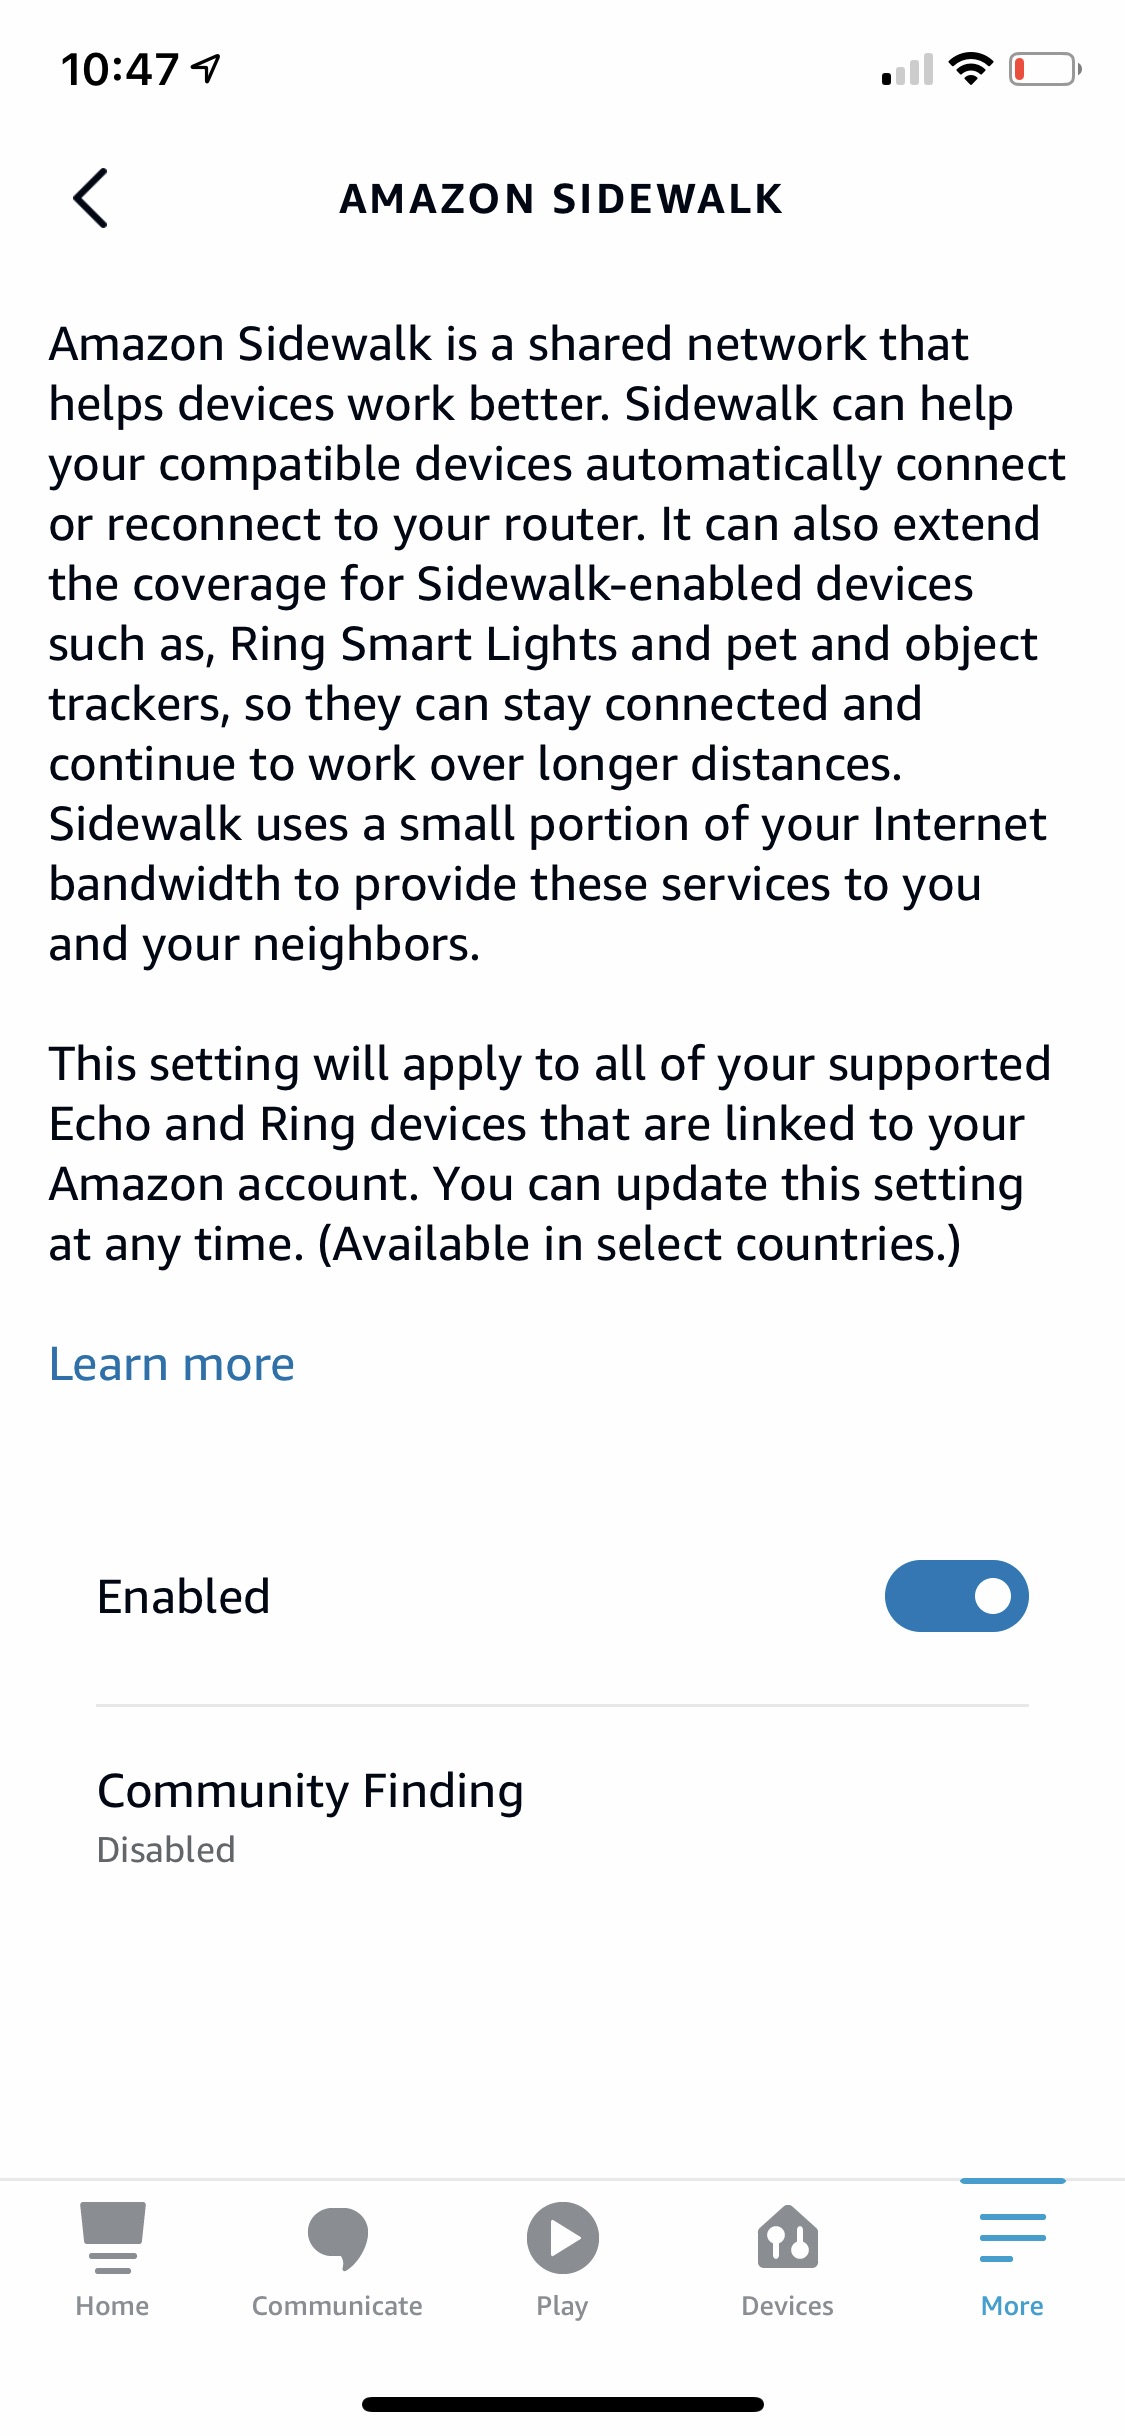 Amazon Started Sharing Your Internet Connection Today, Here&#039;s How to Turn It Off